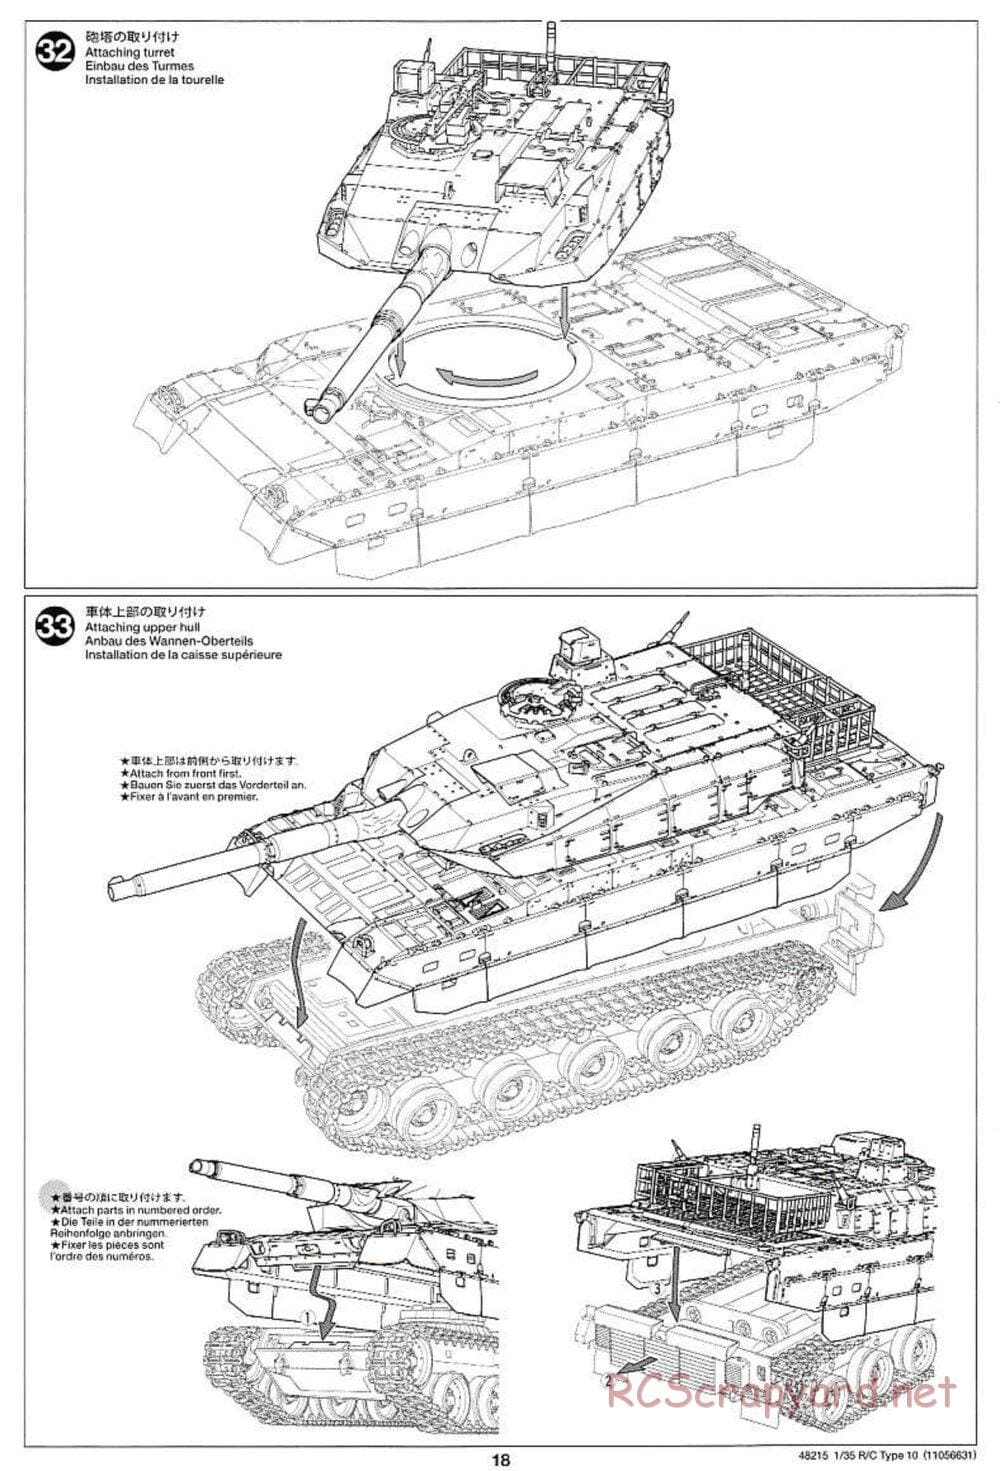 Tamiya - JGSDF Type 10 Tank - 1/35 Scale Chassis - Manual - Page 18